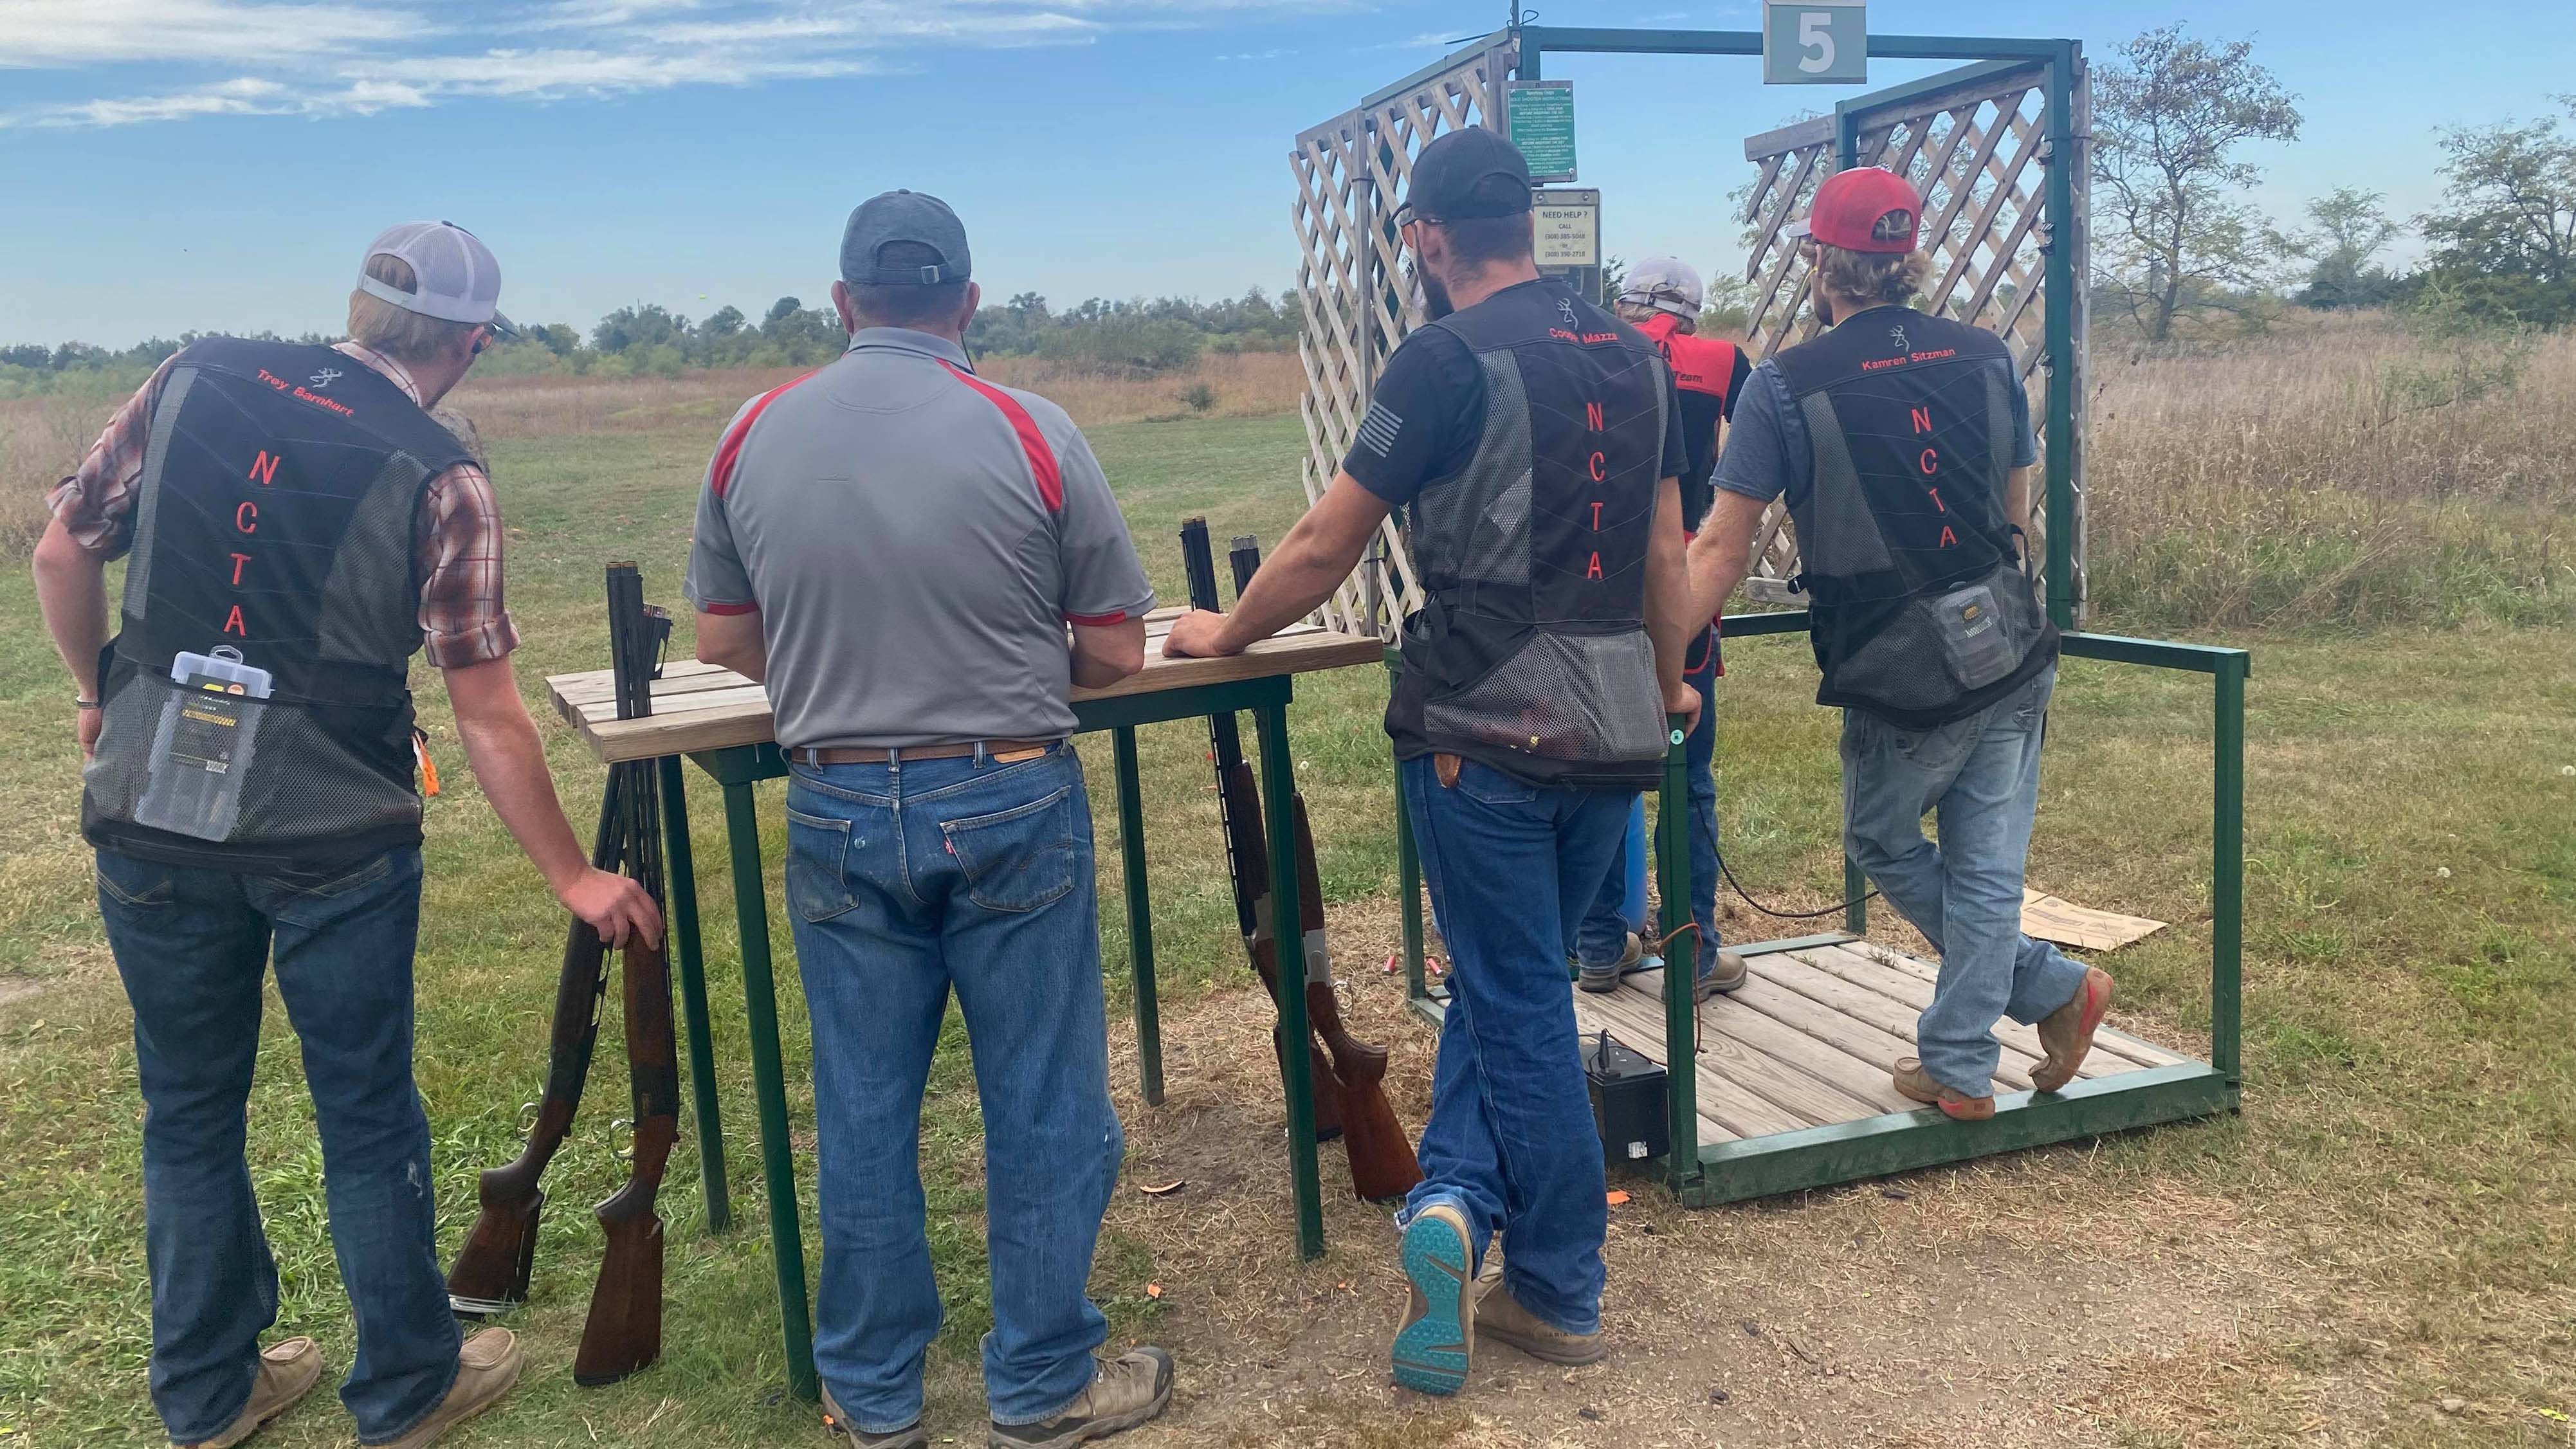 Aggie Shotgun Sports team members from the Nebraska College of Technical Agriculture are identified by NCTA vests. They shot last weekend in a match at Heartland Shooting Park near Grand Island. Coach Alan Taylor is second from left. (Photo by Kaden Bryant / NCTA)